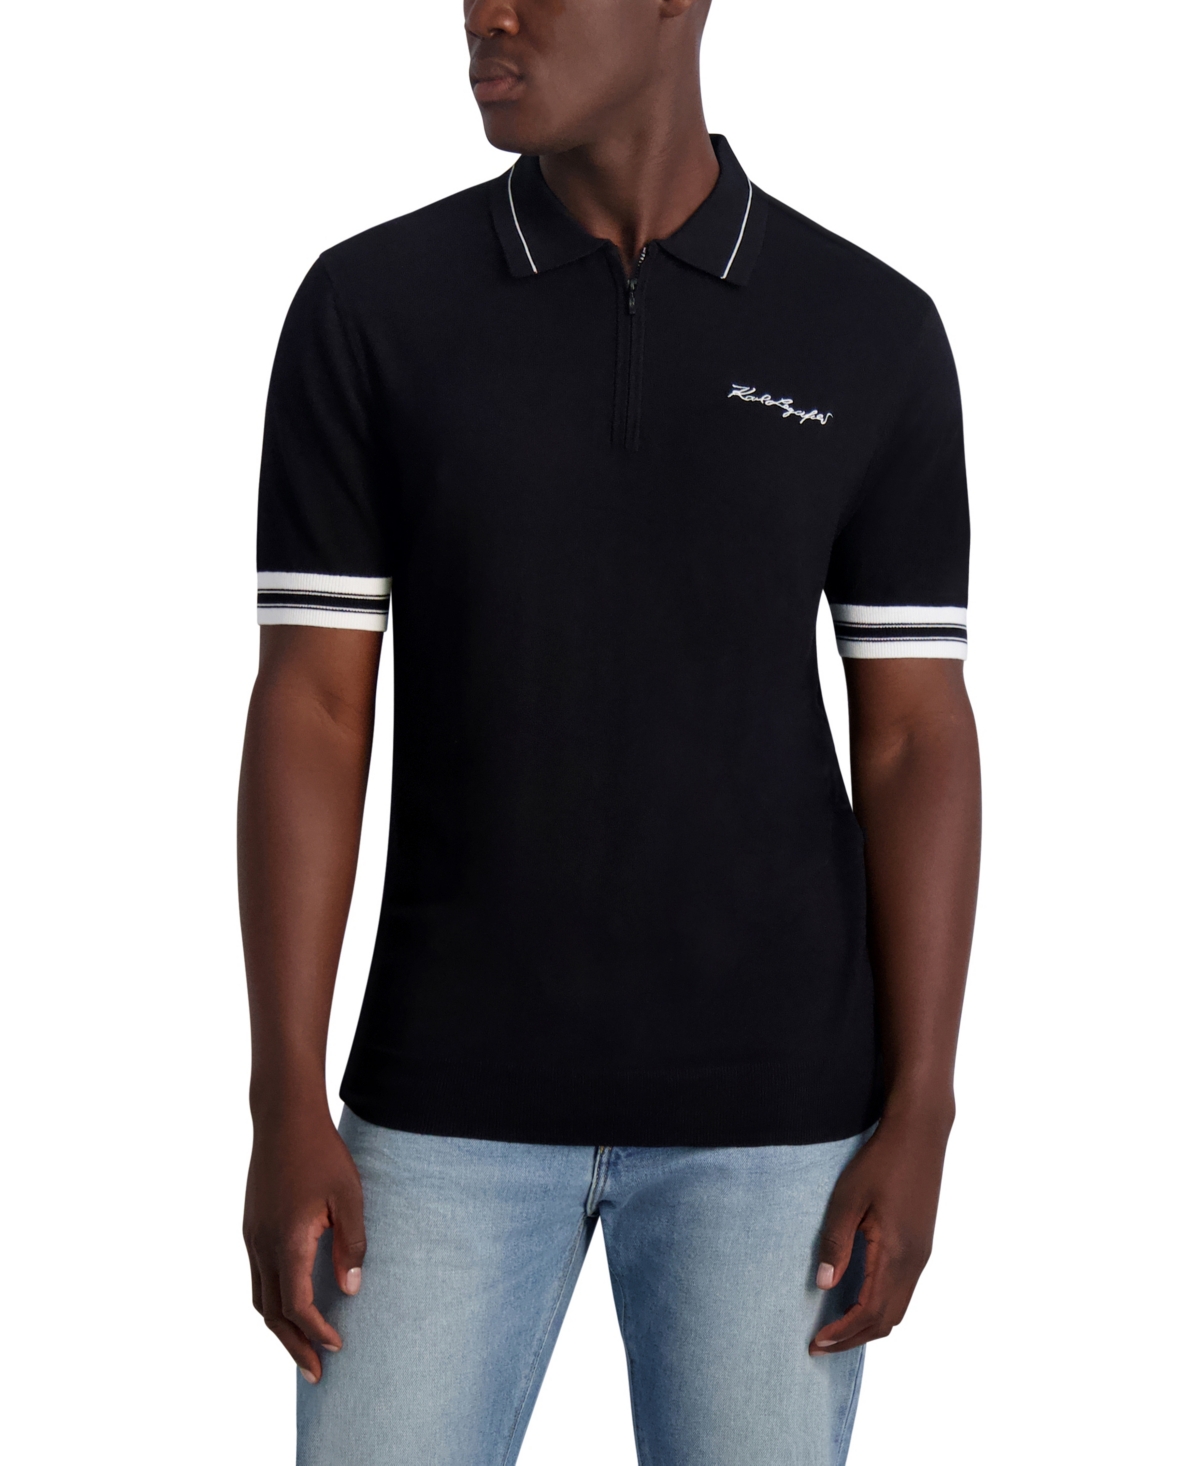 Men's Contrasting Color Sleeves and Signature Logo Sweater Polo Shirt - Black